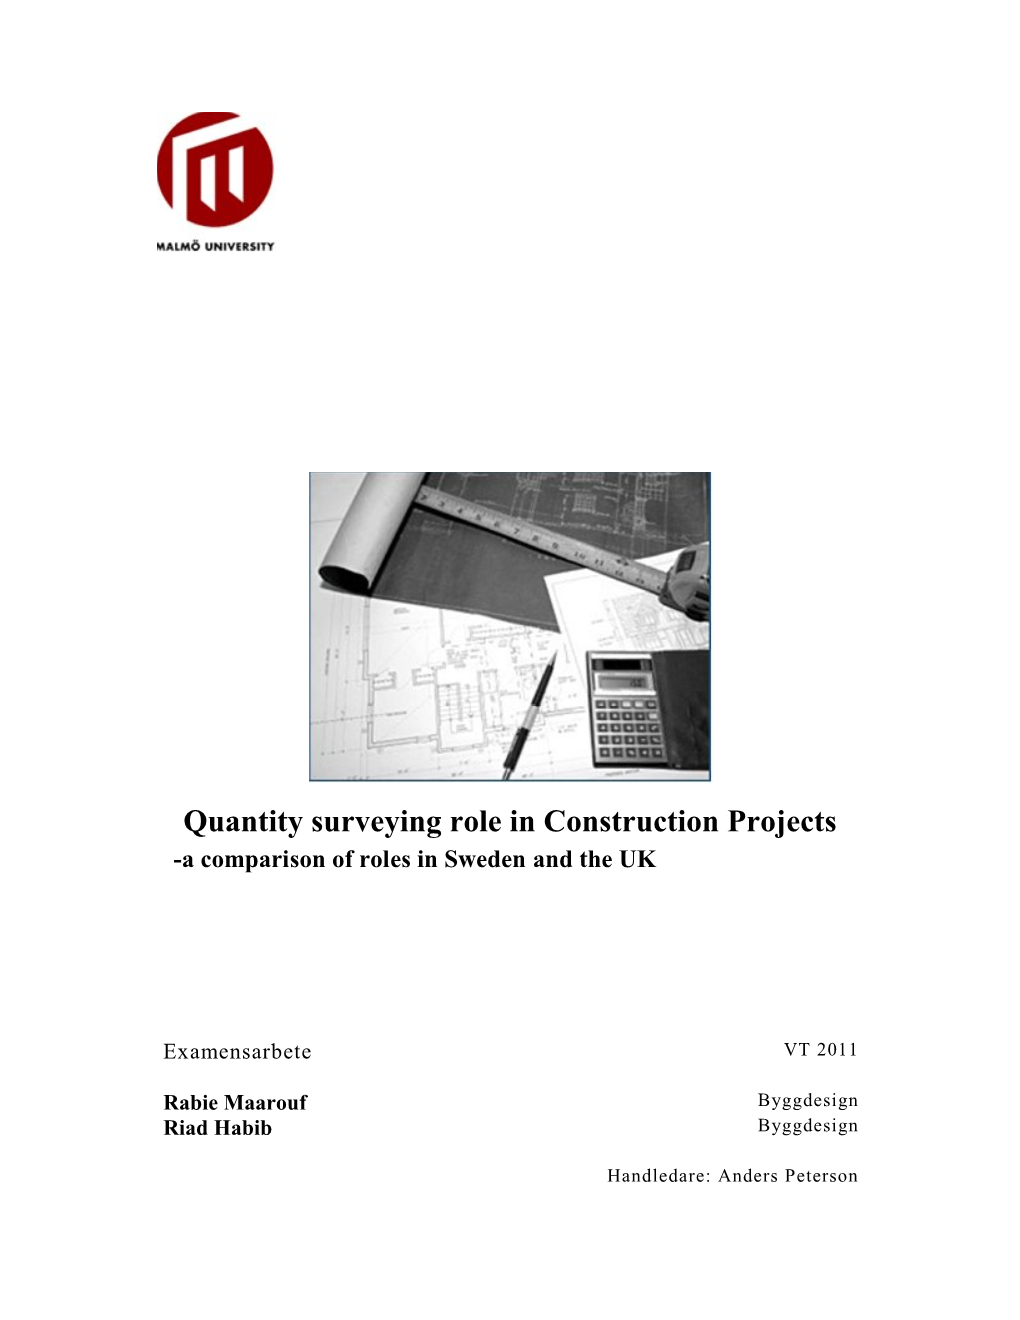 Quantity Surveying Role in Construction Projects -A Comparison of Roles in Sweden and the UK